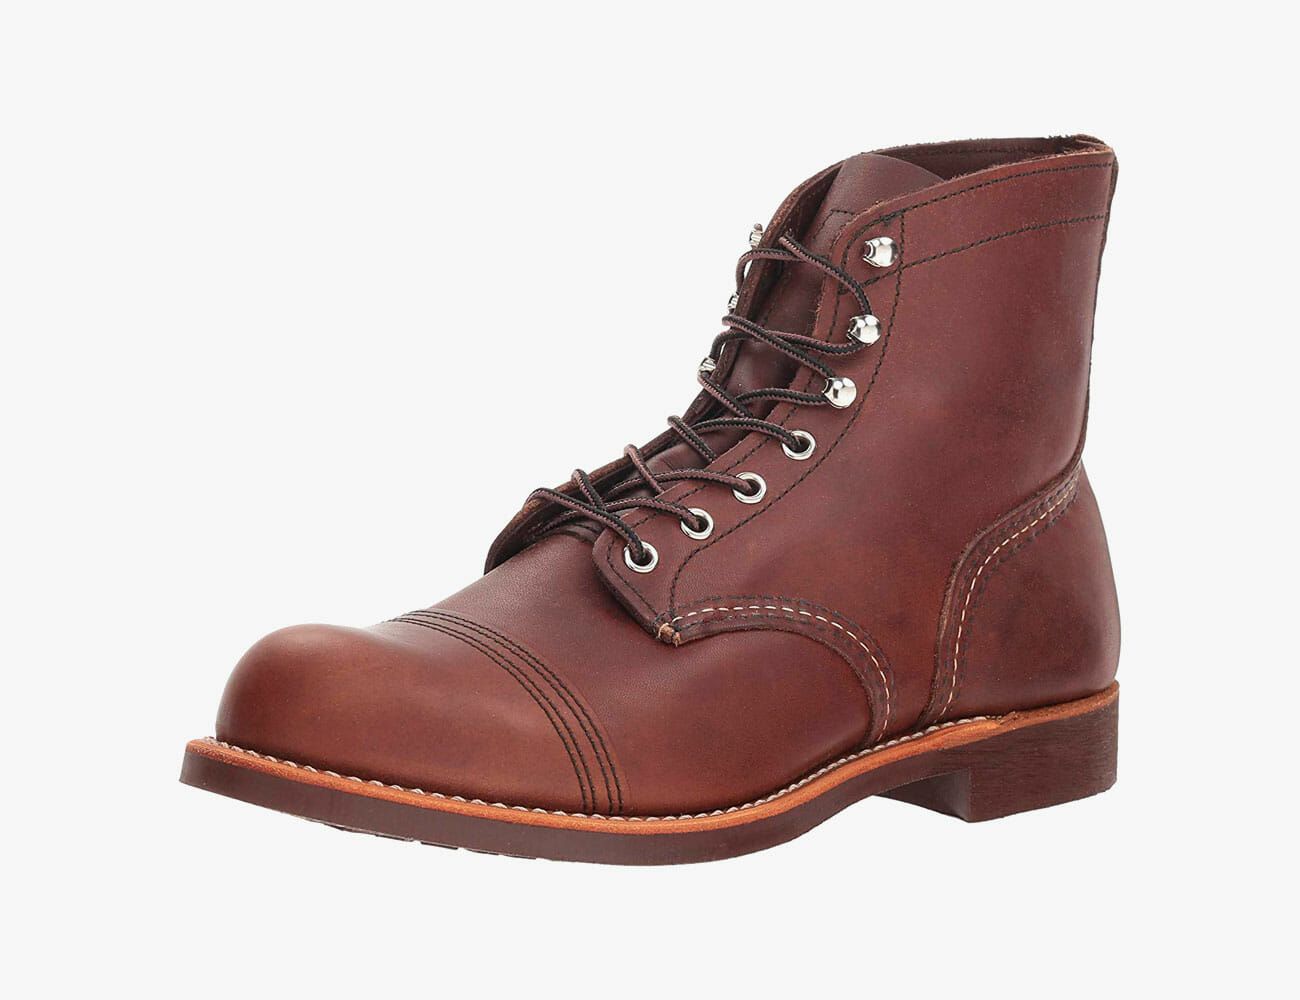 most comfortable red wing work boots